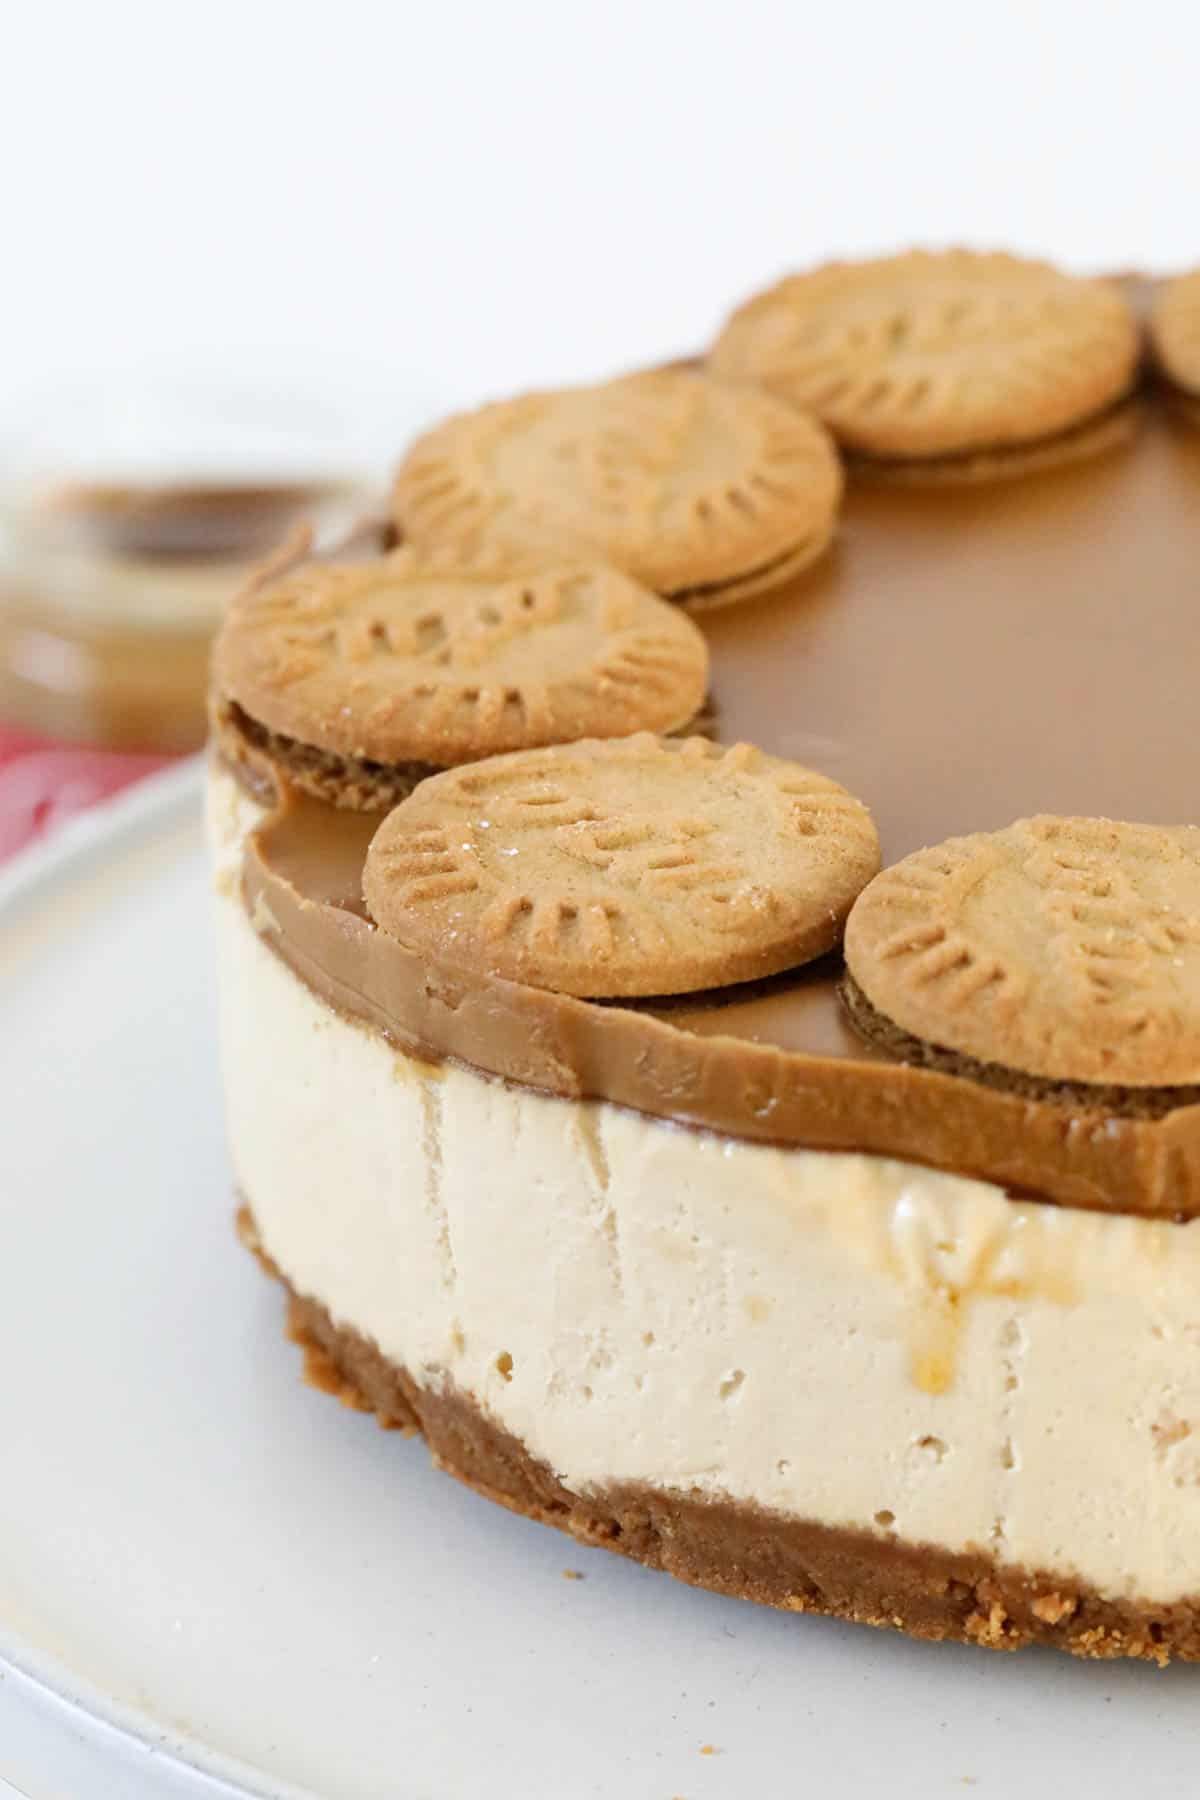 A close up of a cheesecake decorated with biscuits.